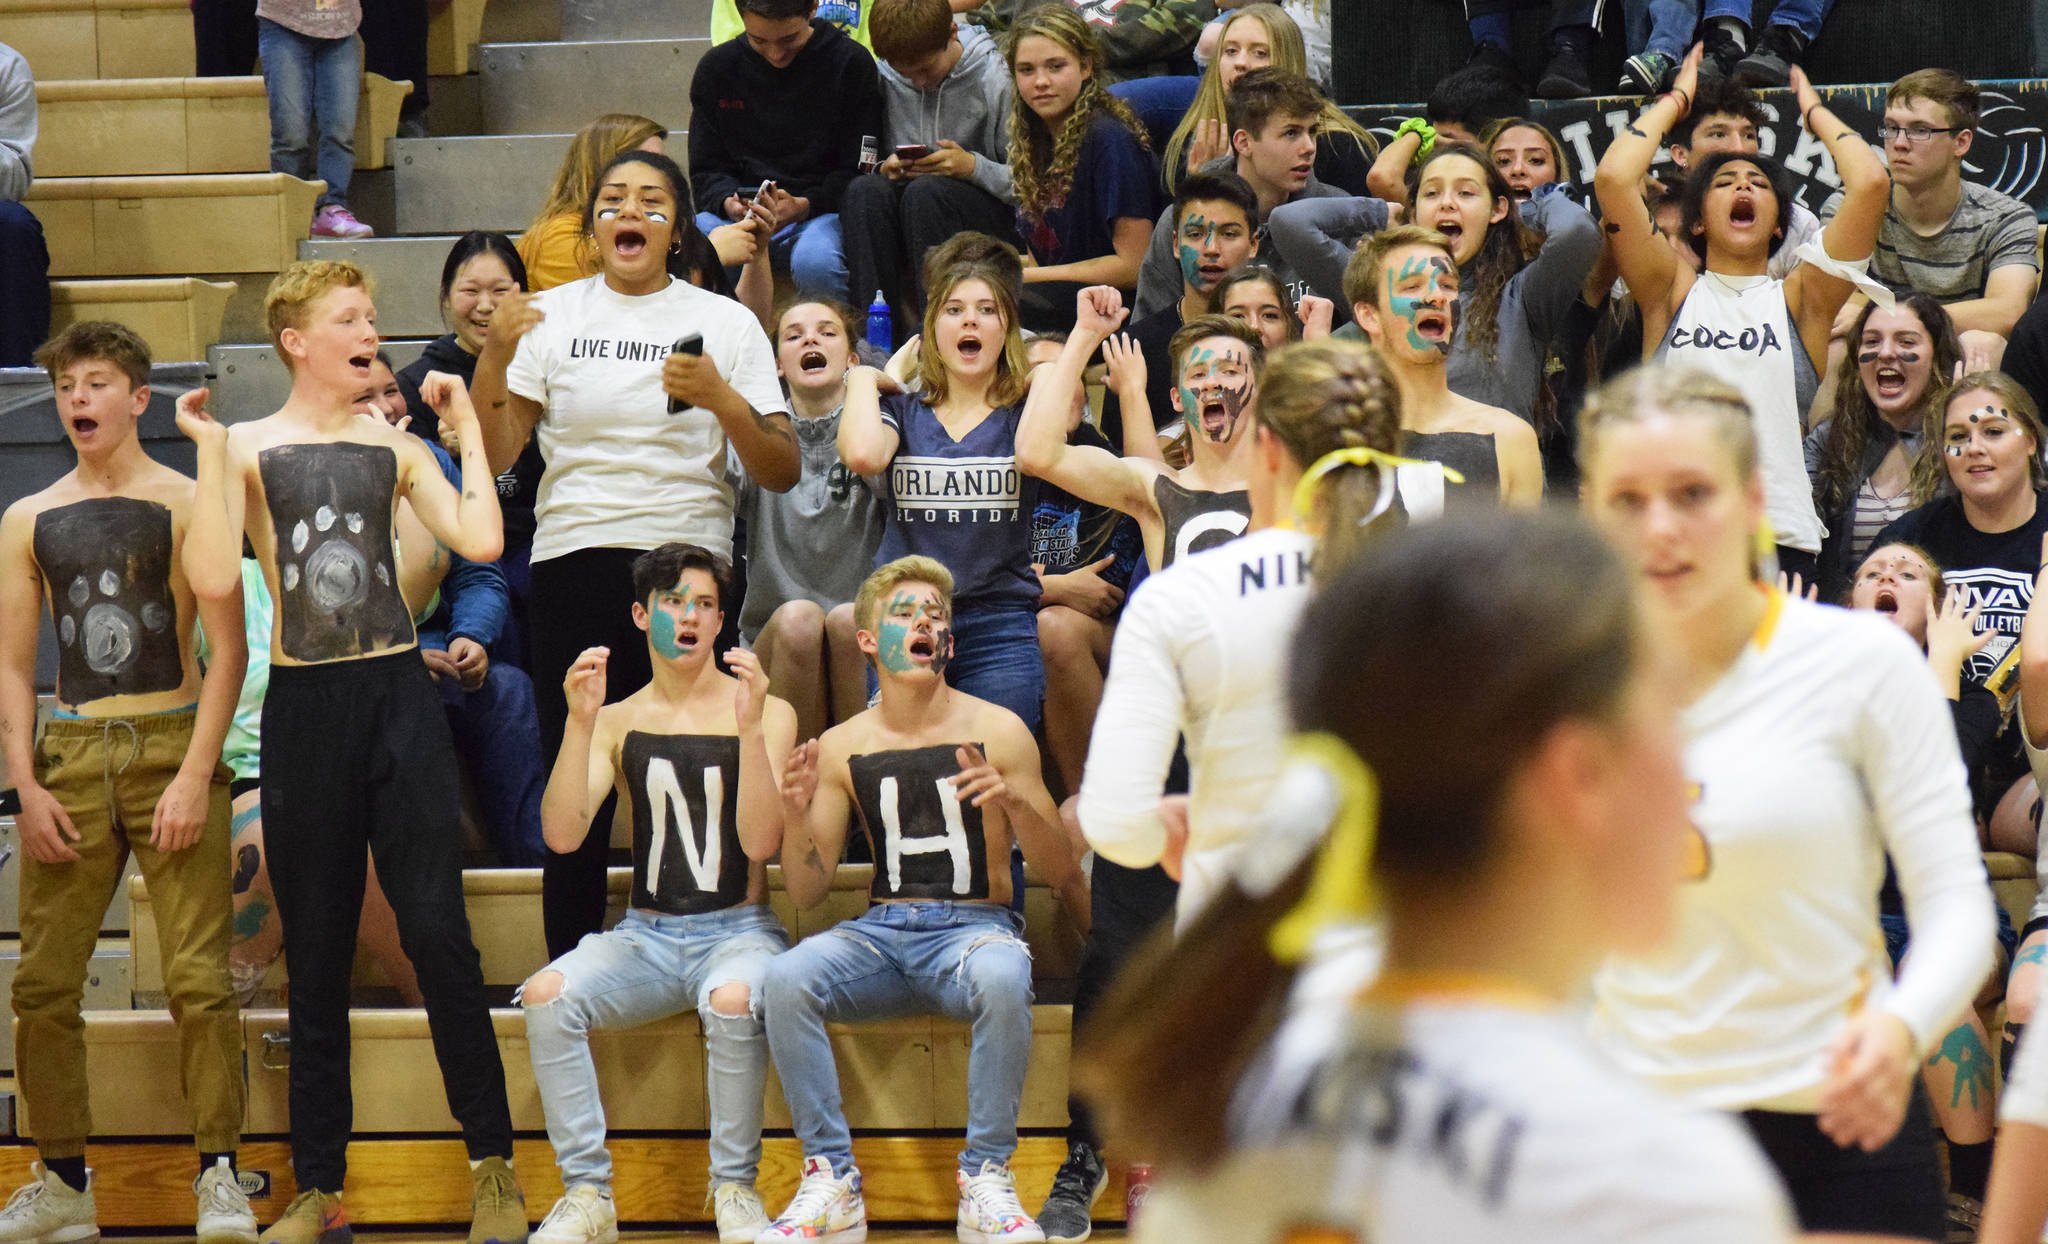 Nikiski High School students, as well as a few Soldotna High School volleyball players, cheer on the Nikiski volleyball team Tuesday, Sept. 17, 2019, against Kenai Central at Nikiski High School. (Photo by Joey Klecka/Peninsula Clarion)